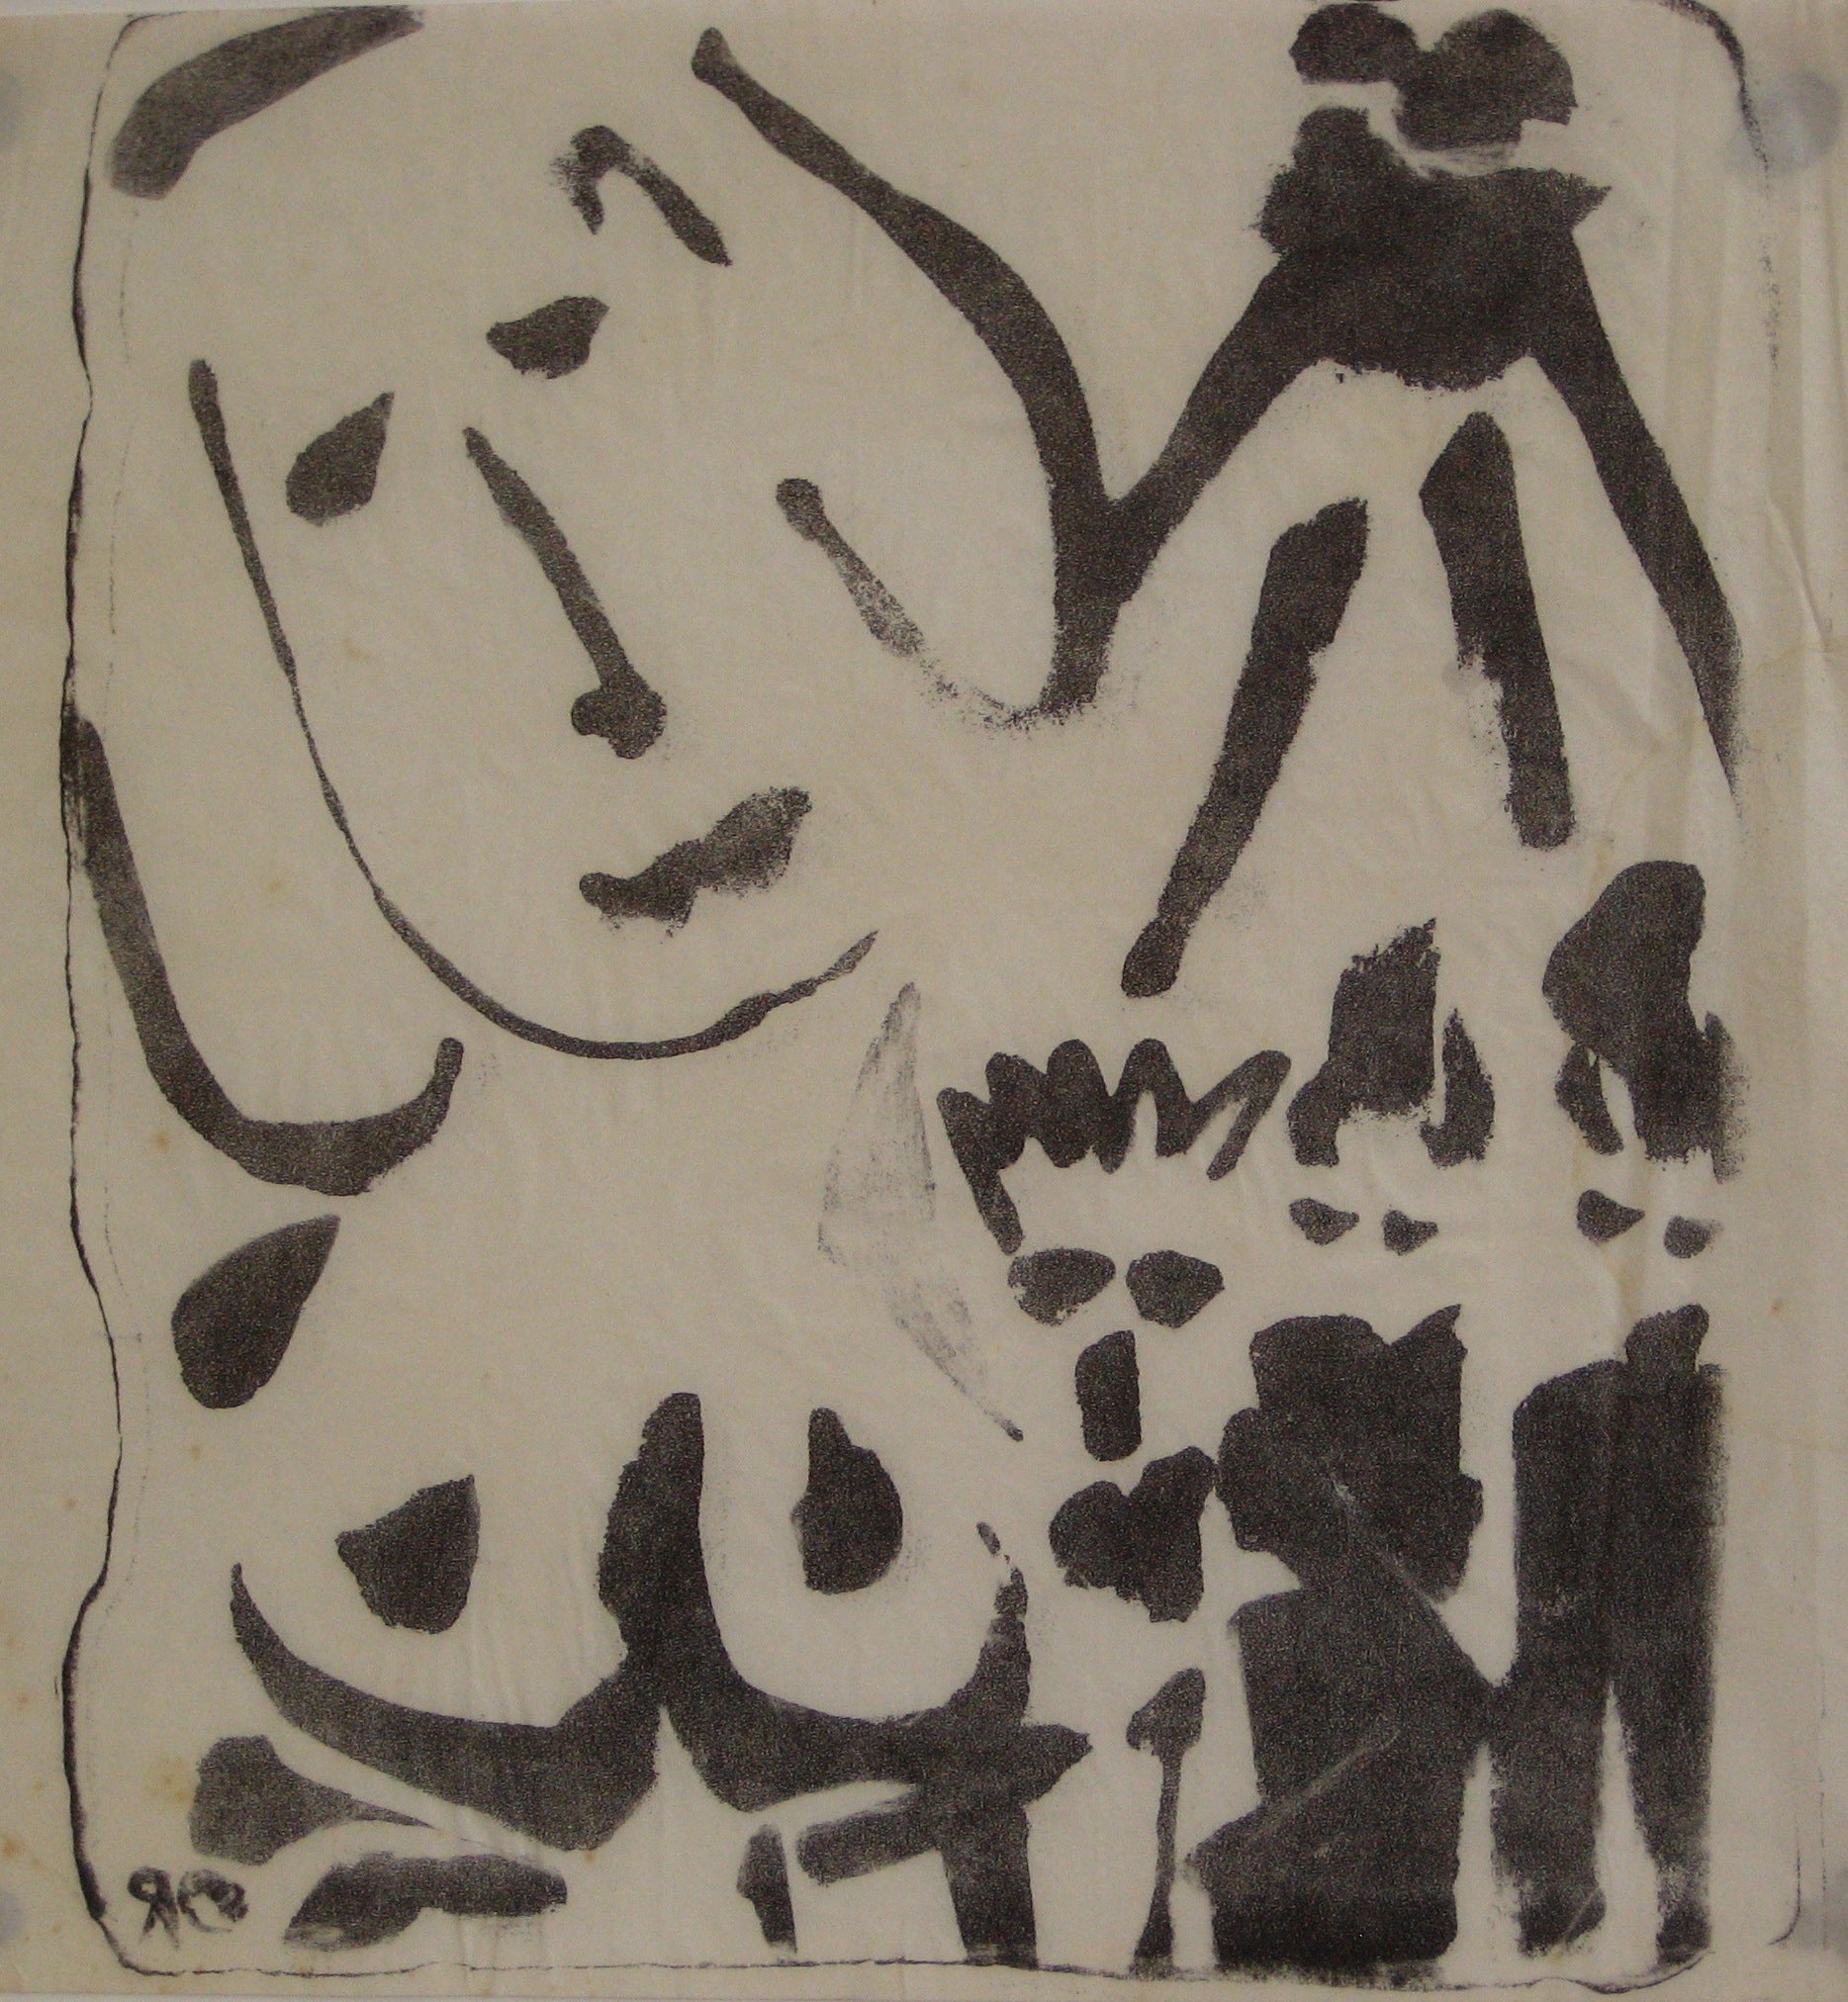 Modernist Abstracted Figures<br>1940-70s, Lithograph<br><br>#5379